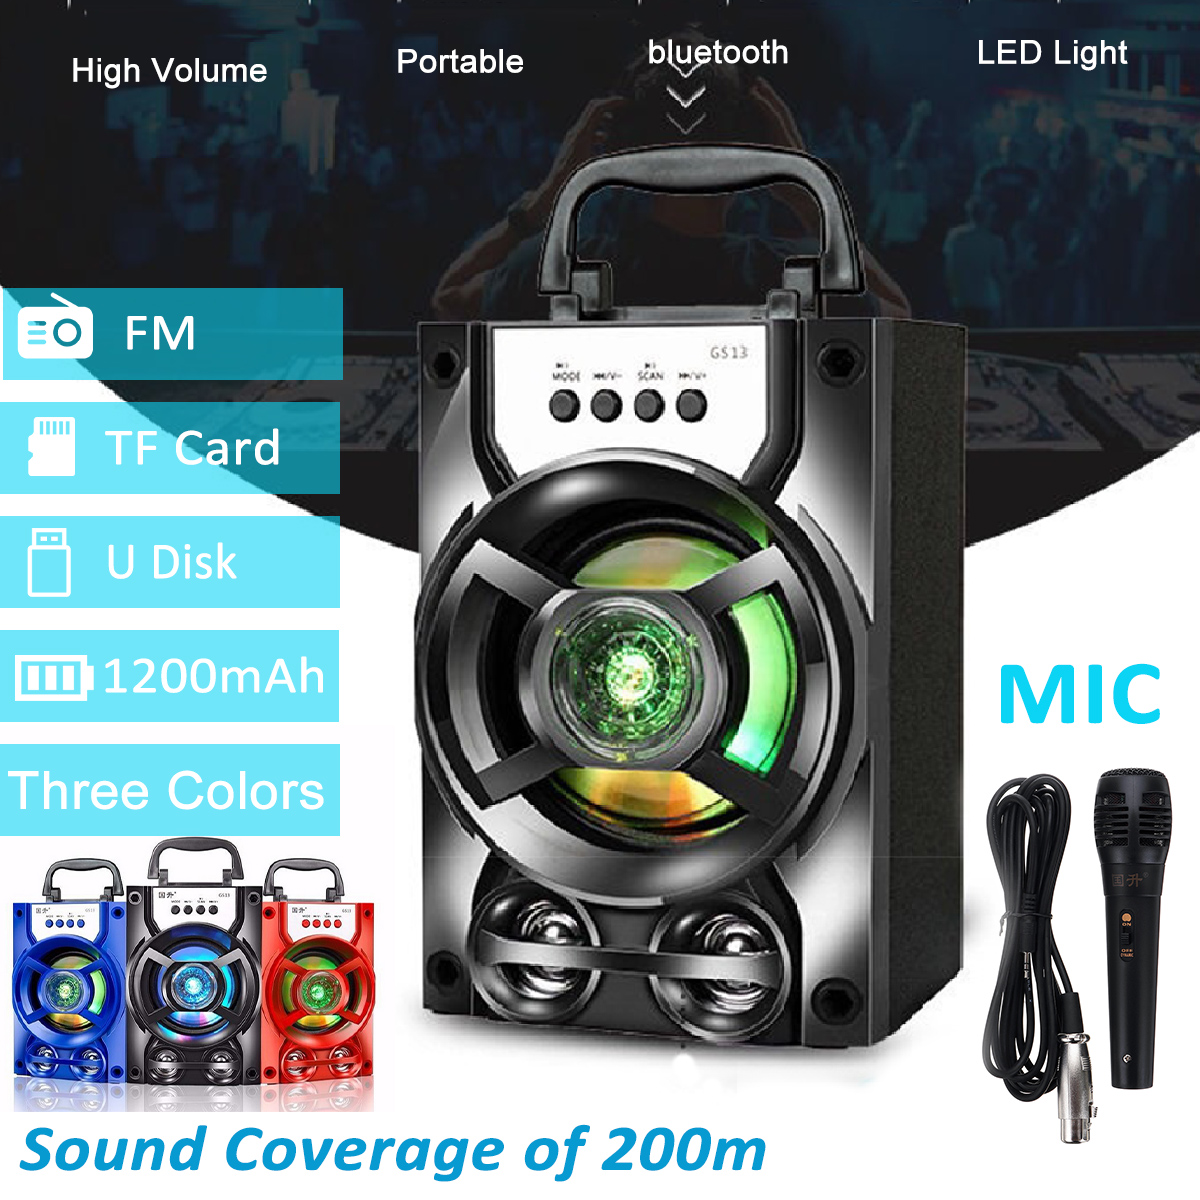 Portable bluetooth Subwoofer Speaker TF Card U Disk Music Player FM Radio Microphone for Meeting Dance Party Lecture